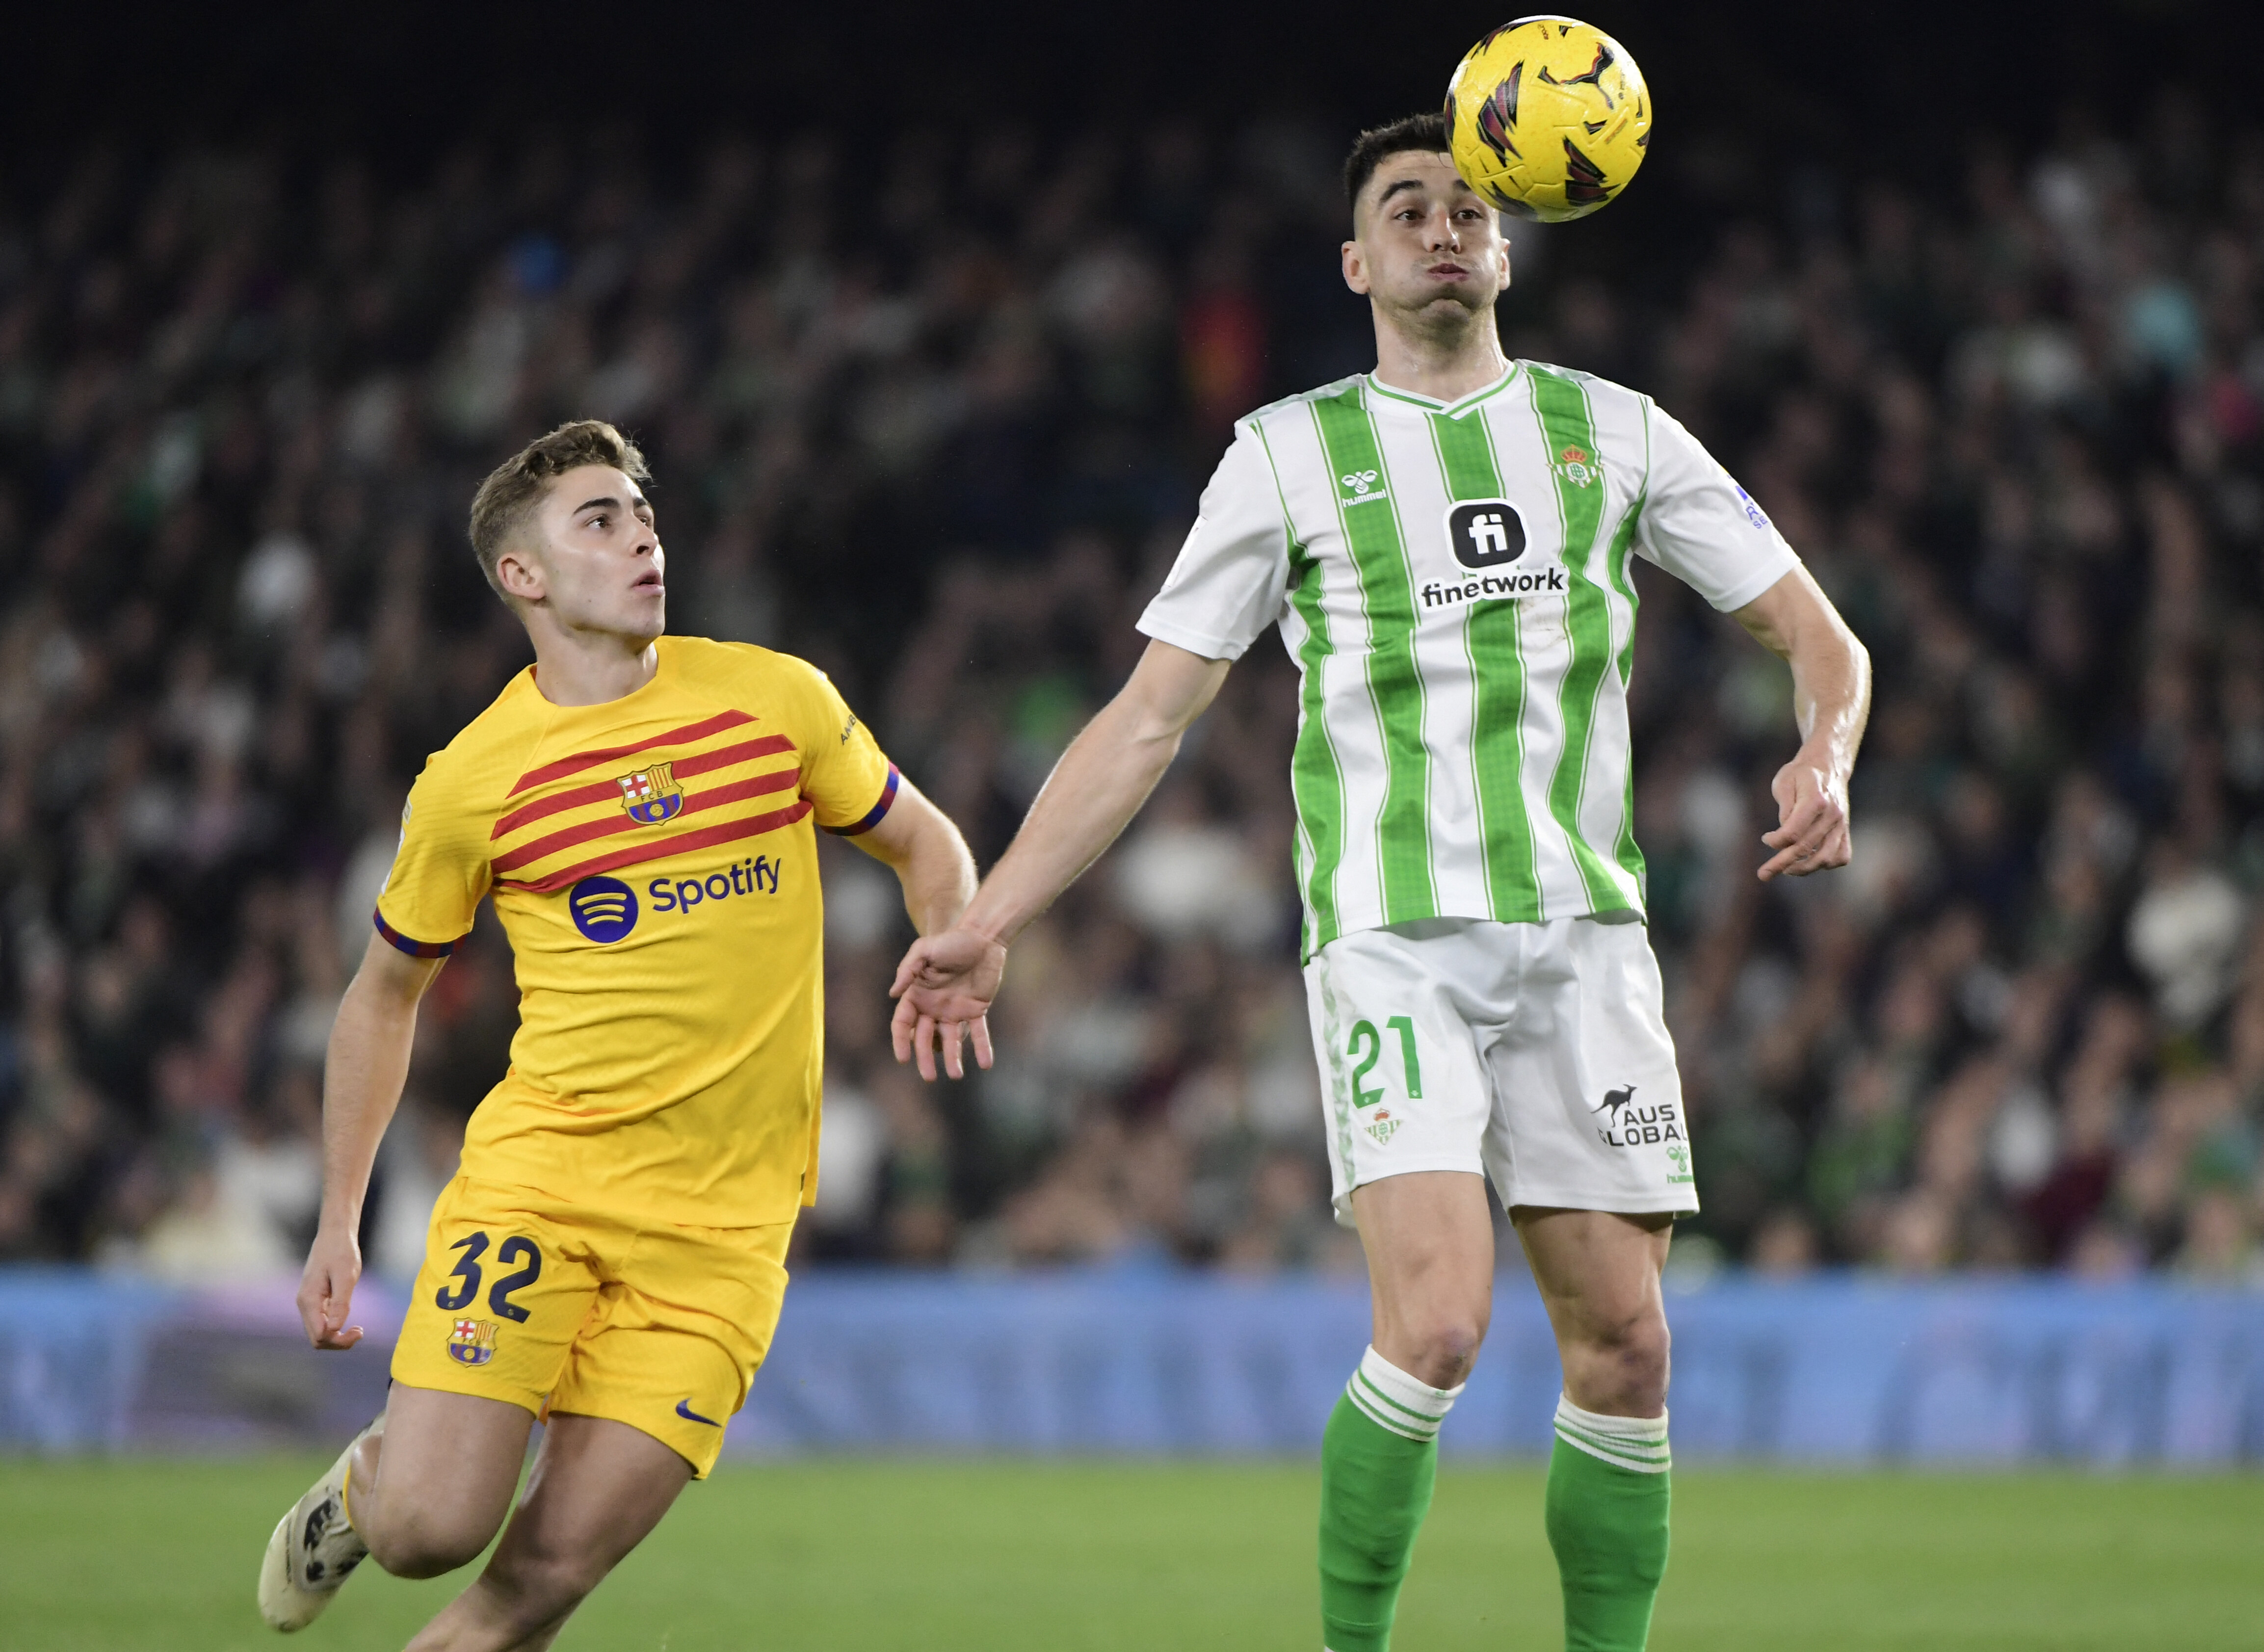 Real Betis would benefit from Leeds United losing to Southampton in the play-offs; the La Liga club could re-sign Marc Roca for cheaper